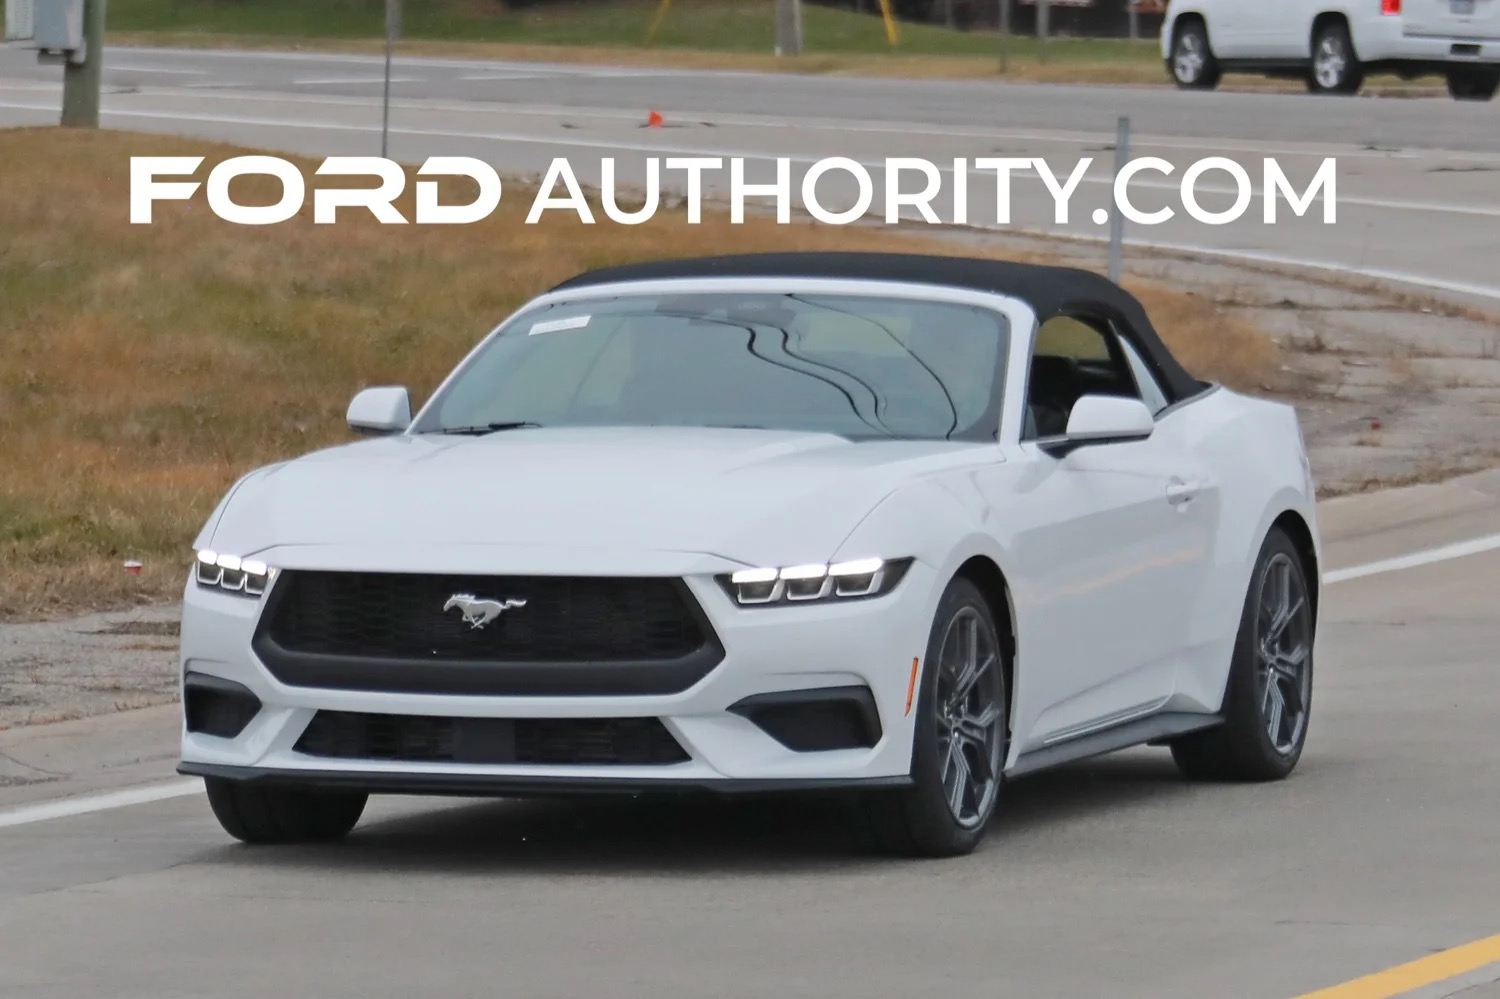 S650 Mustang Official OXFORD WHITE Mustang S650 Thread 2024-Ford-Mustang-EcoBoost-Convertible-Oxford-White-YZ-First-Real-World-Photos-Exterior-002